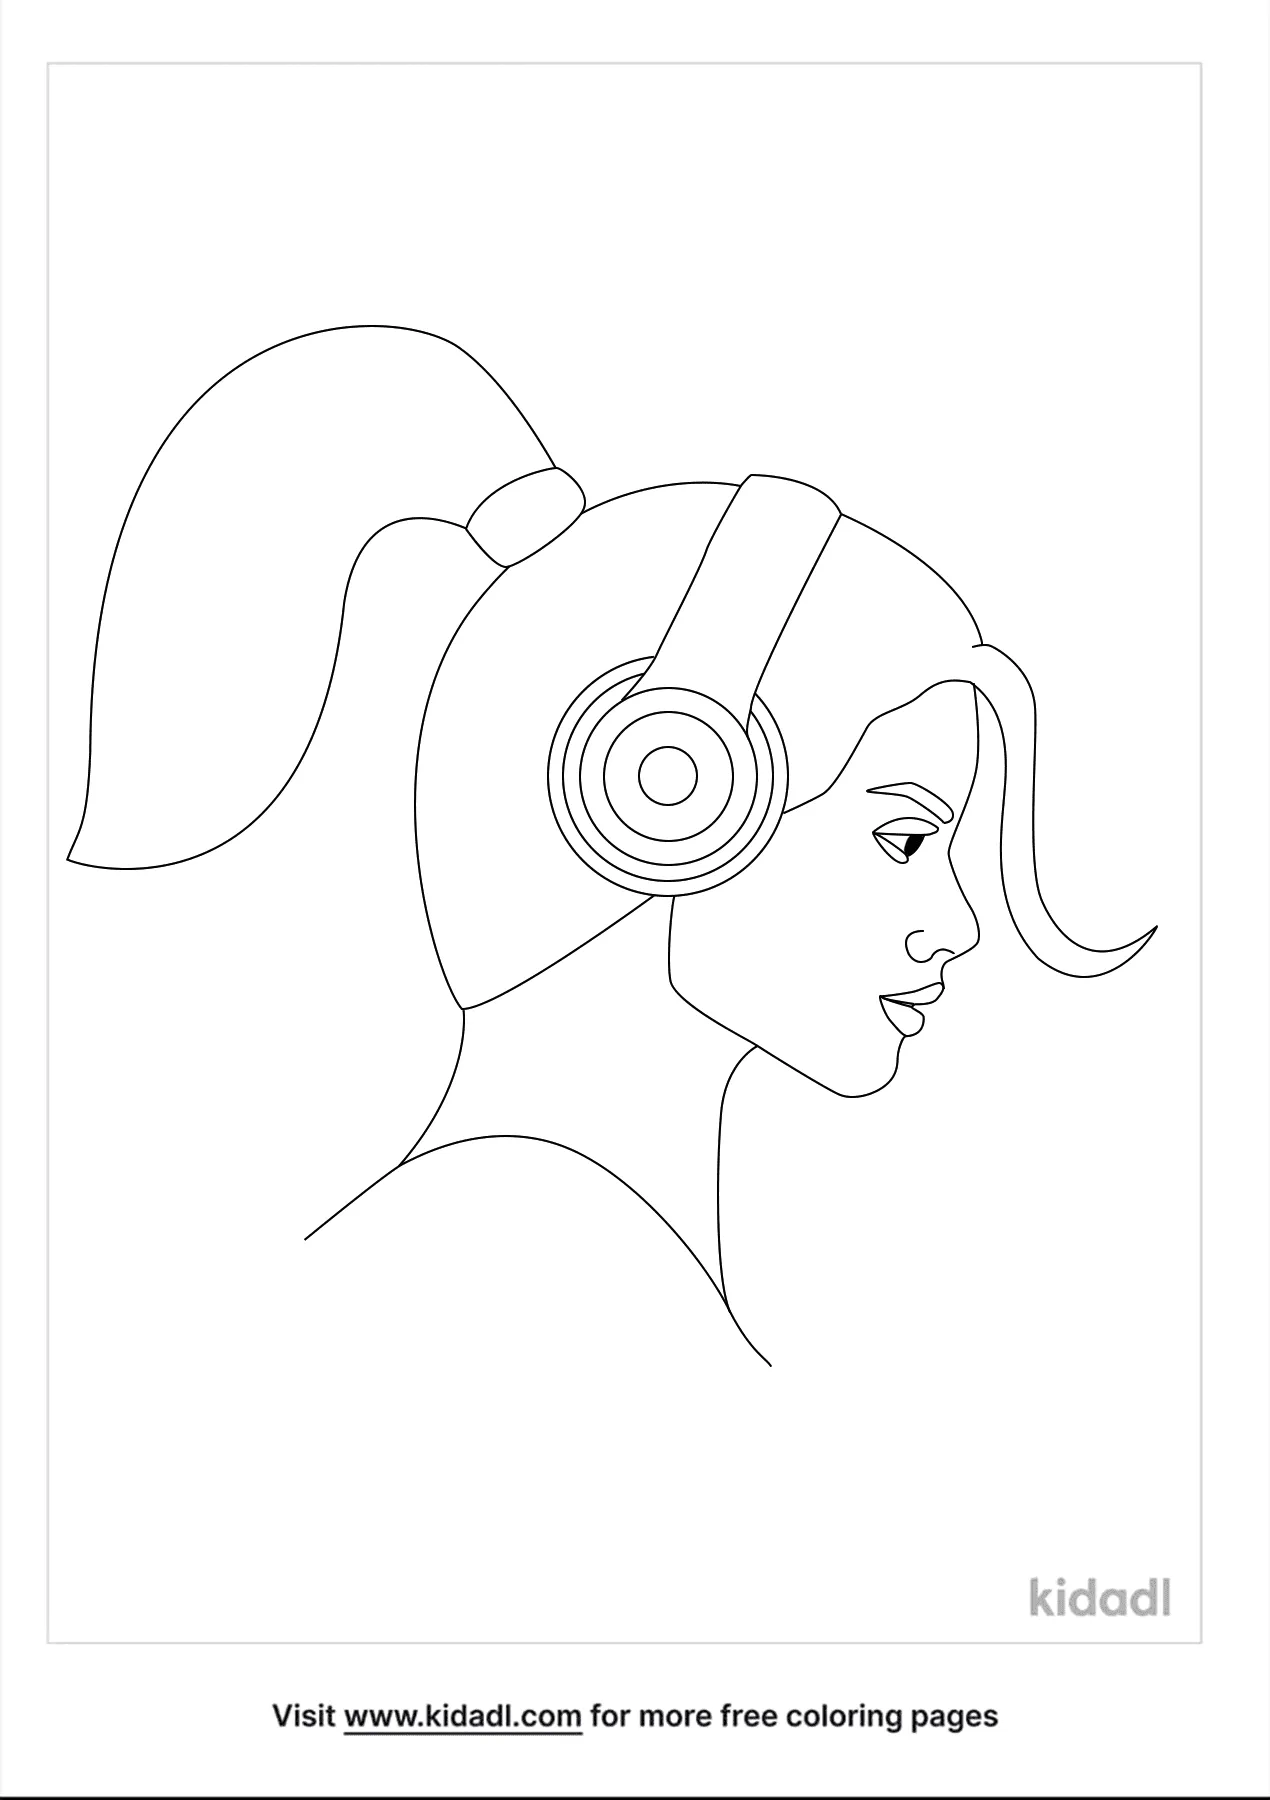 Ponytail And Headphones Coloring Page